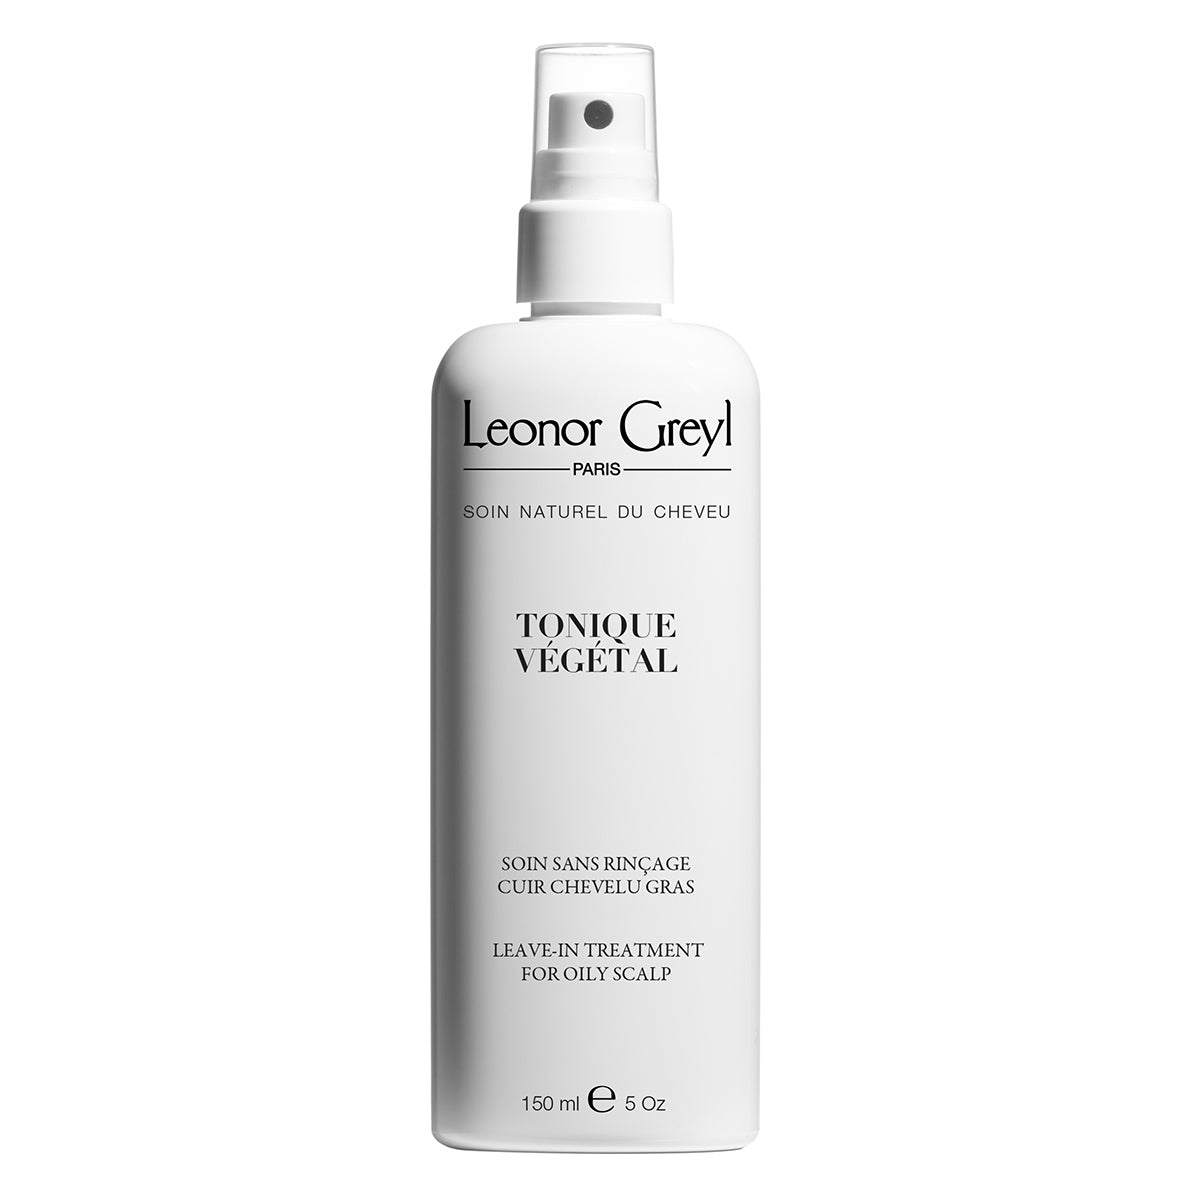 Tonique Vegetal (Leave-In Treatment for Oily Scalp)